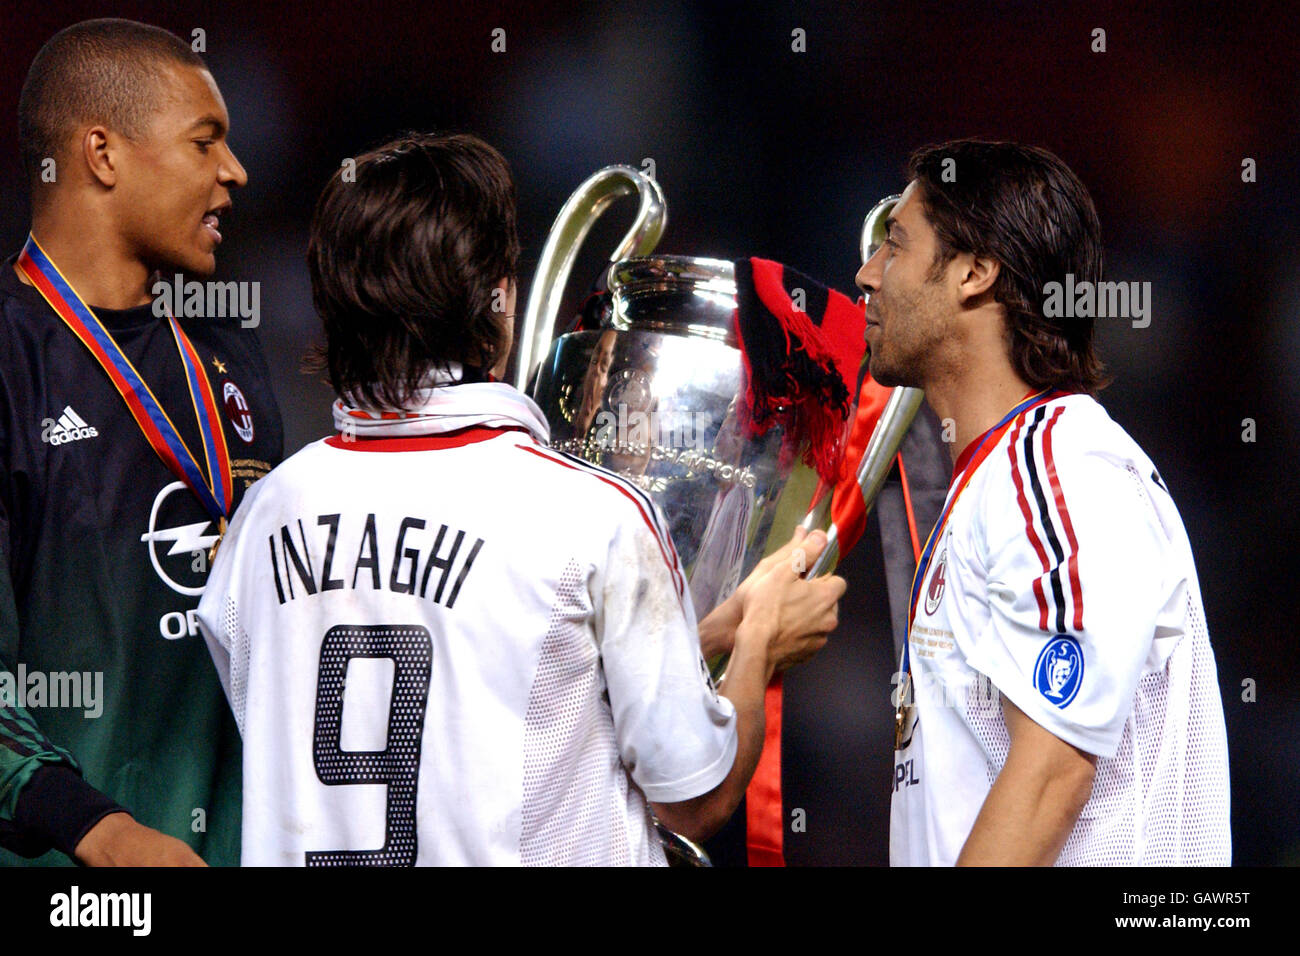 Soccer - UEFA Champions League - Final - Juventus v AC Milan. L-R: AC Milan's goalkeeper Dida, Filippo Inzaghi and Manuel Rui Costa celebrate with the trophy after the victory over Juventus Stock Photo